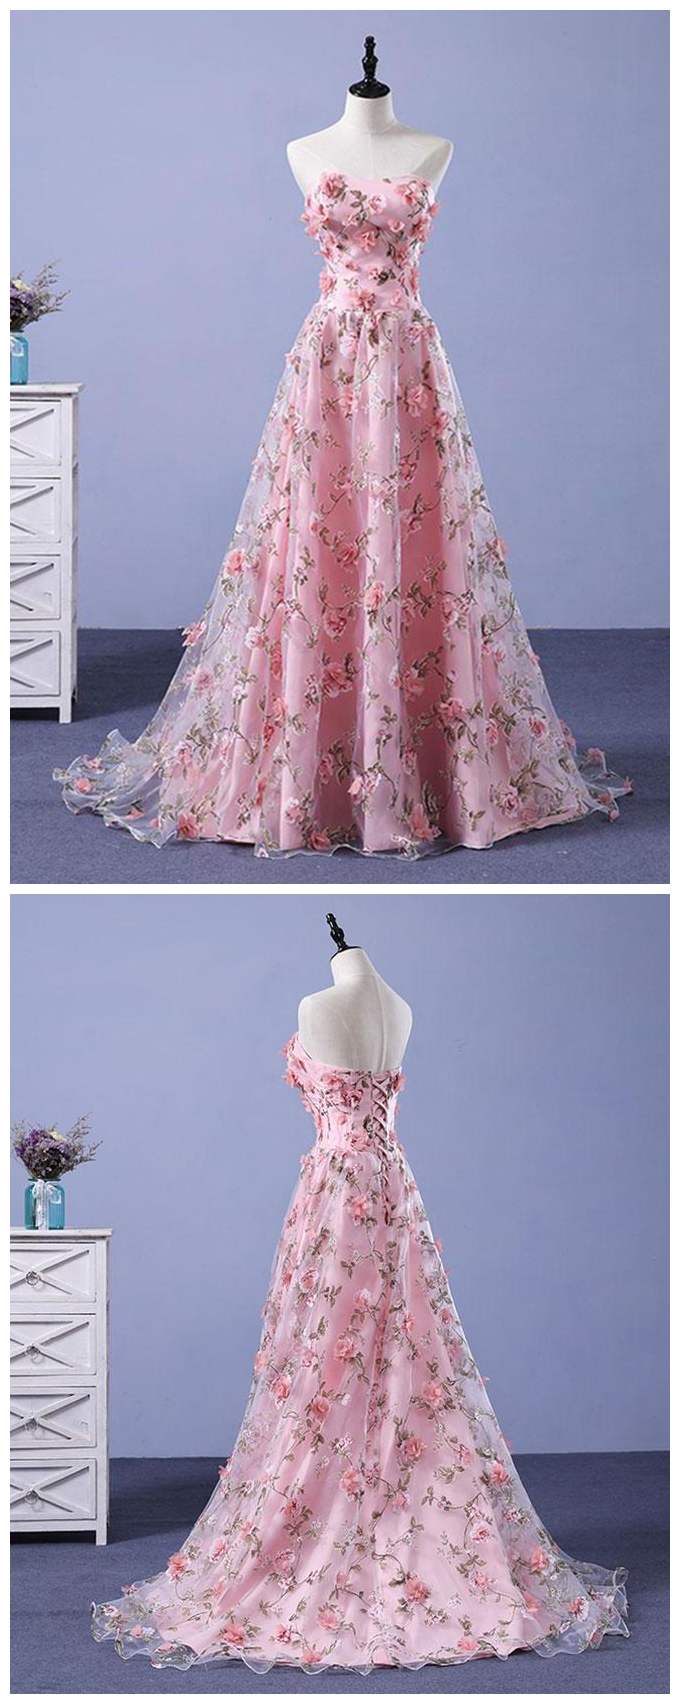 Pink Prom Dresses A-line Sweetheart Sweep Train Floral Print Long Lace Prom Dress